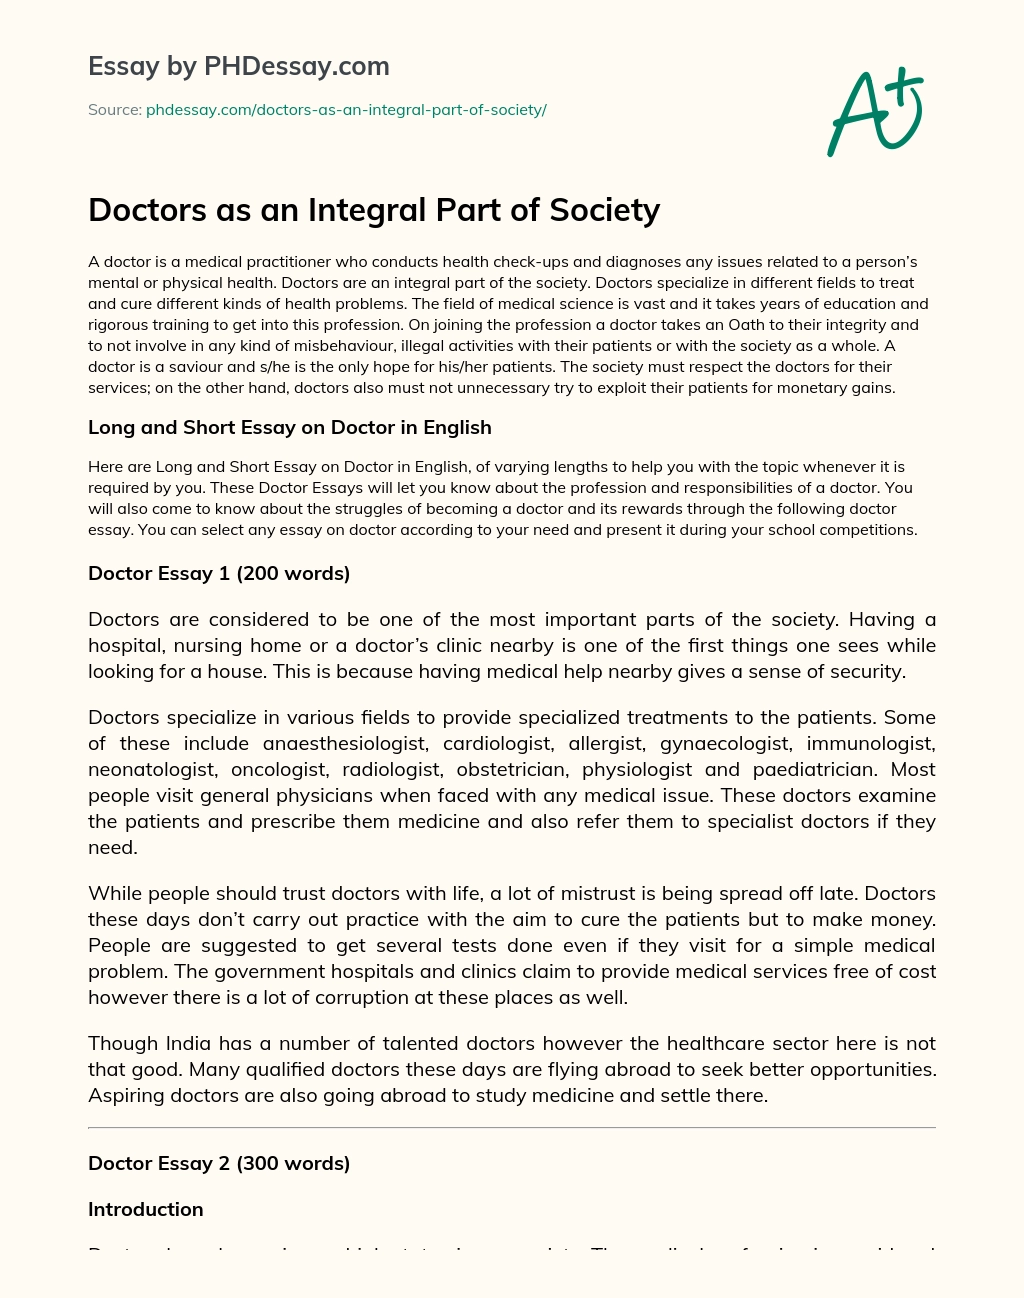 Doctors as an Integral Part of Society essay